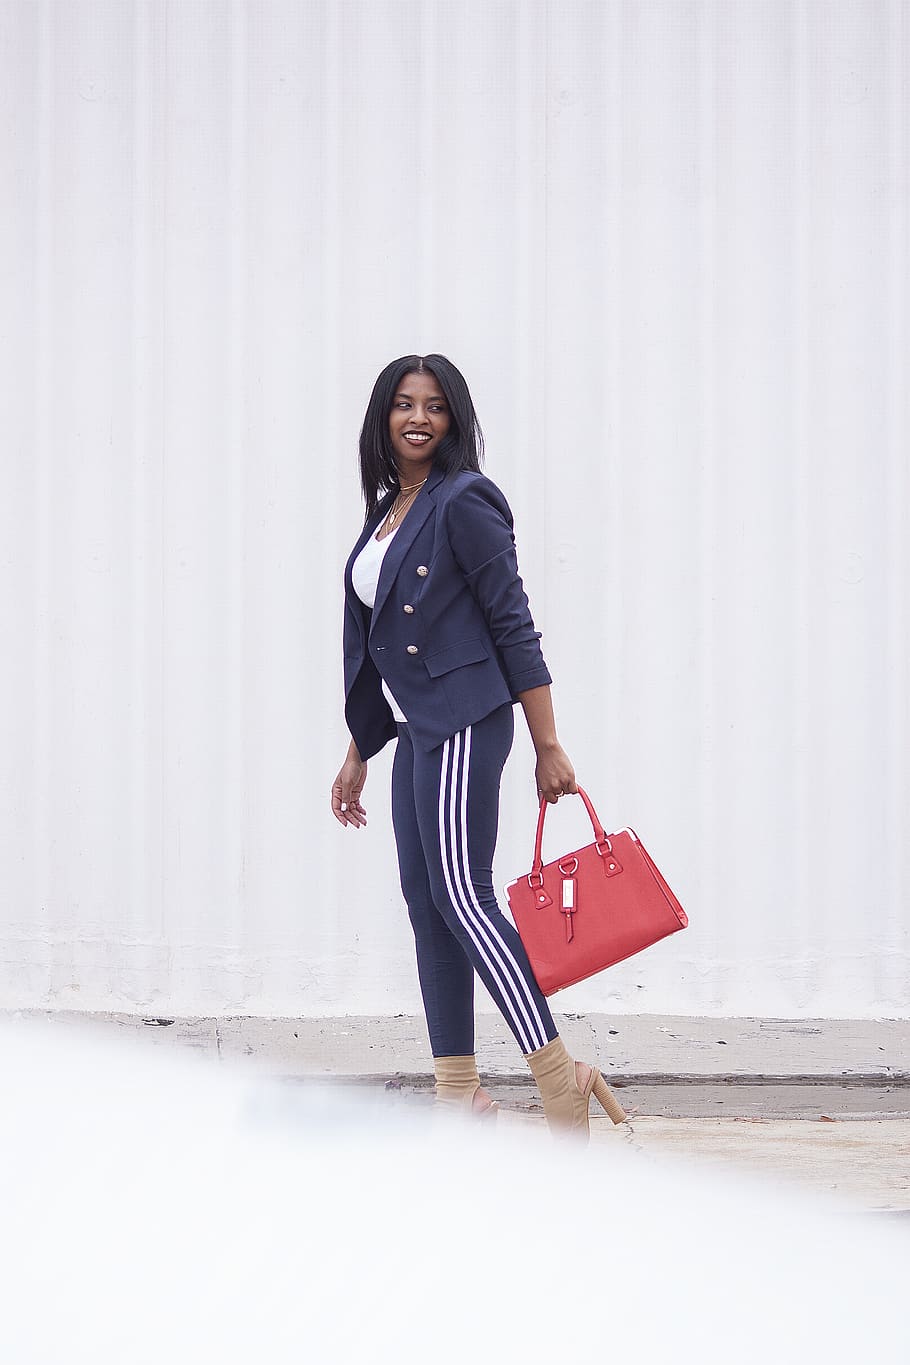 Navy blazer over white tank, navy stretch pants with white stripes down side, red handbag and sexy shoes